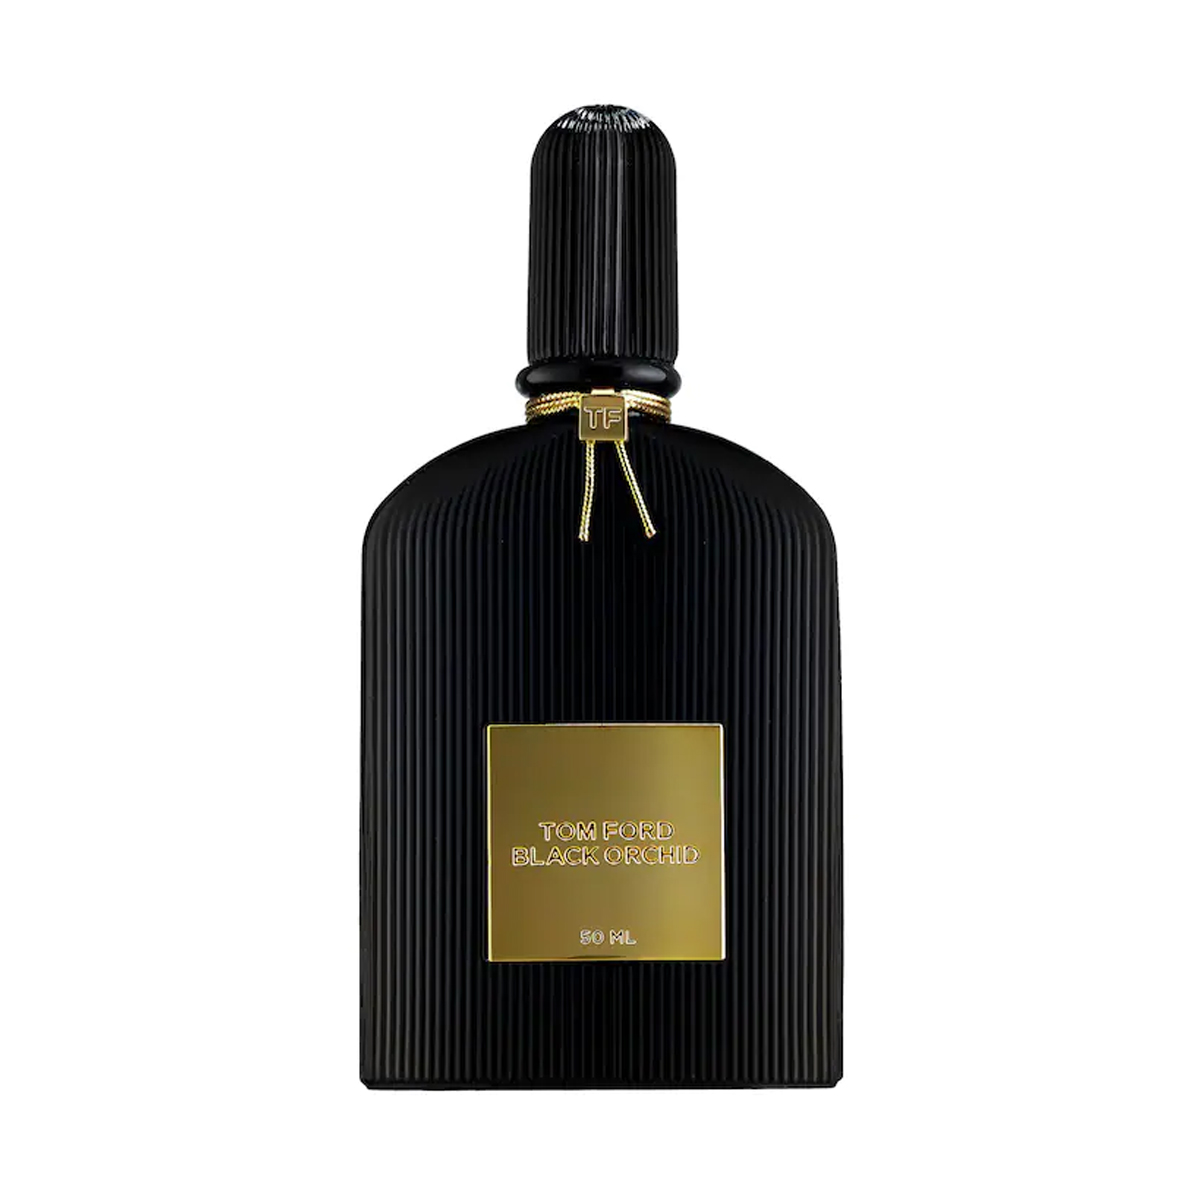 20 Expensive-Smelling Perfumes That Are So Sophisticated | Who What Wear